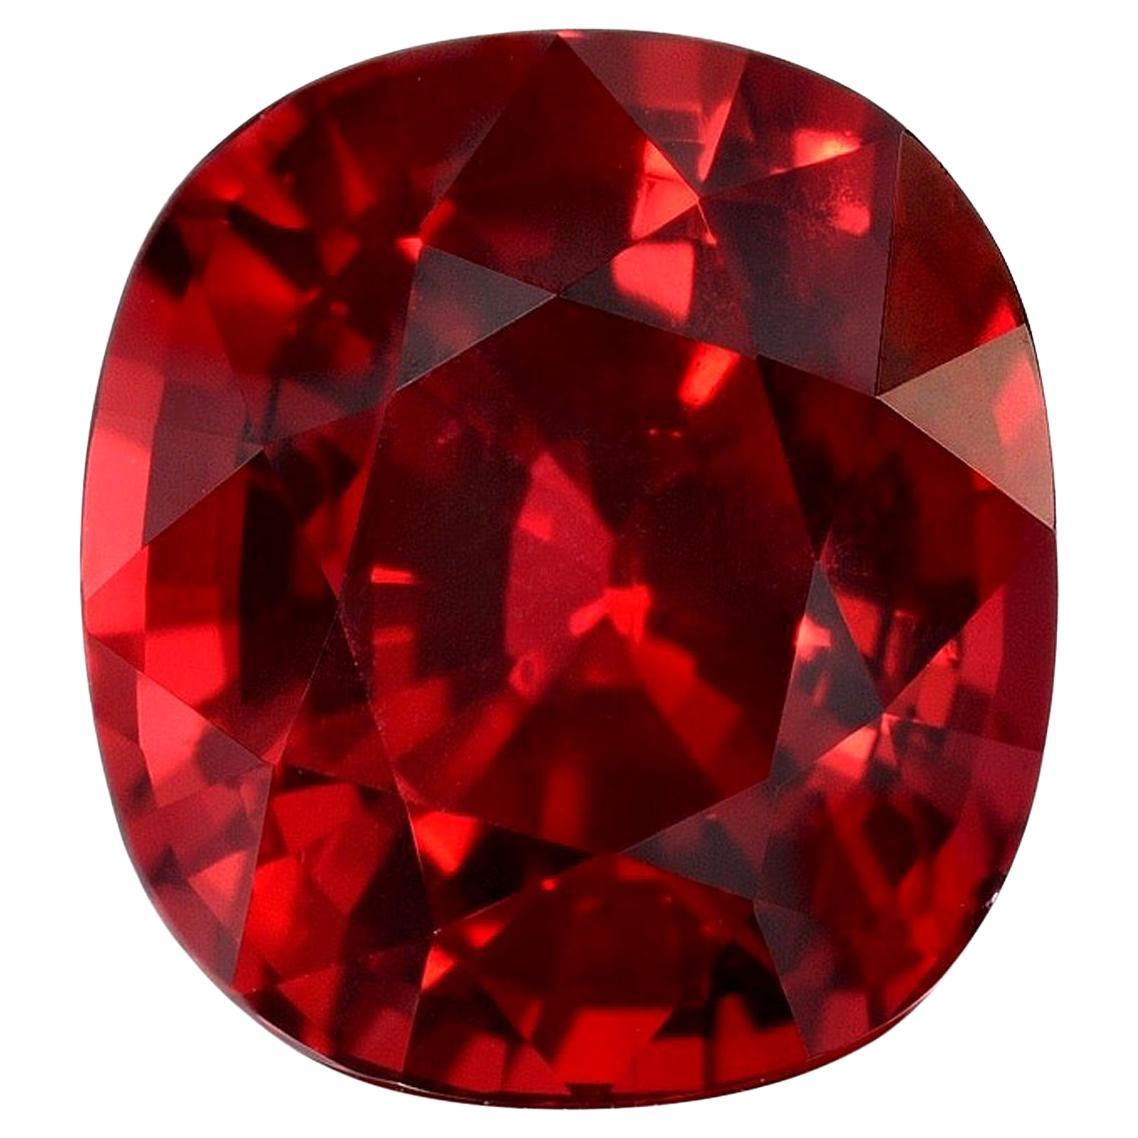 Exceptional 3.17 carats unheated Ruby cushion gem, accompanied by a GIA certificate. This vivid red, no heat Ruby, is offered loose to the world's most passionate gem connoisseurs. 
Returns are accepted and paid by us within 7 days of delivery.
We